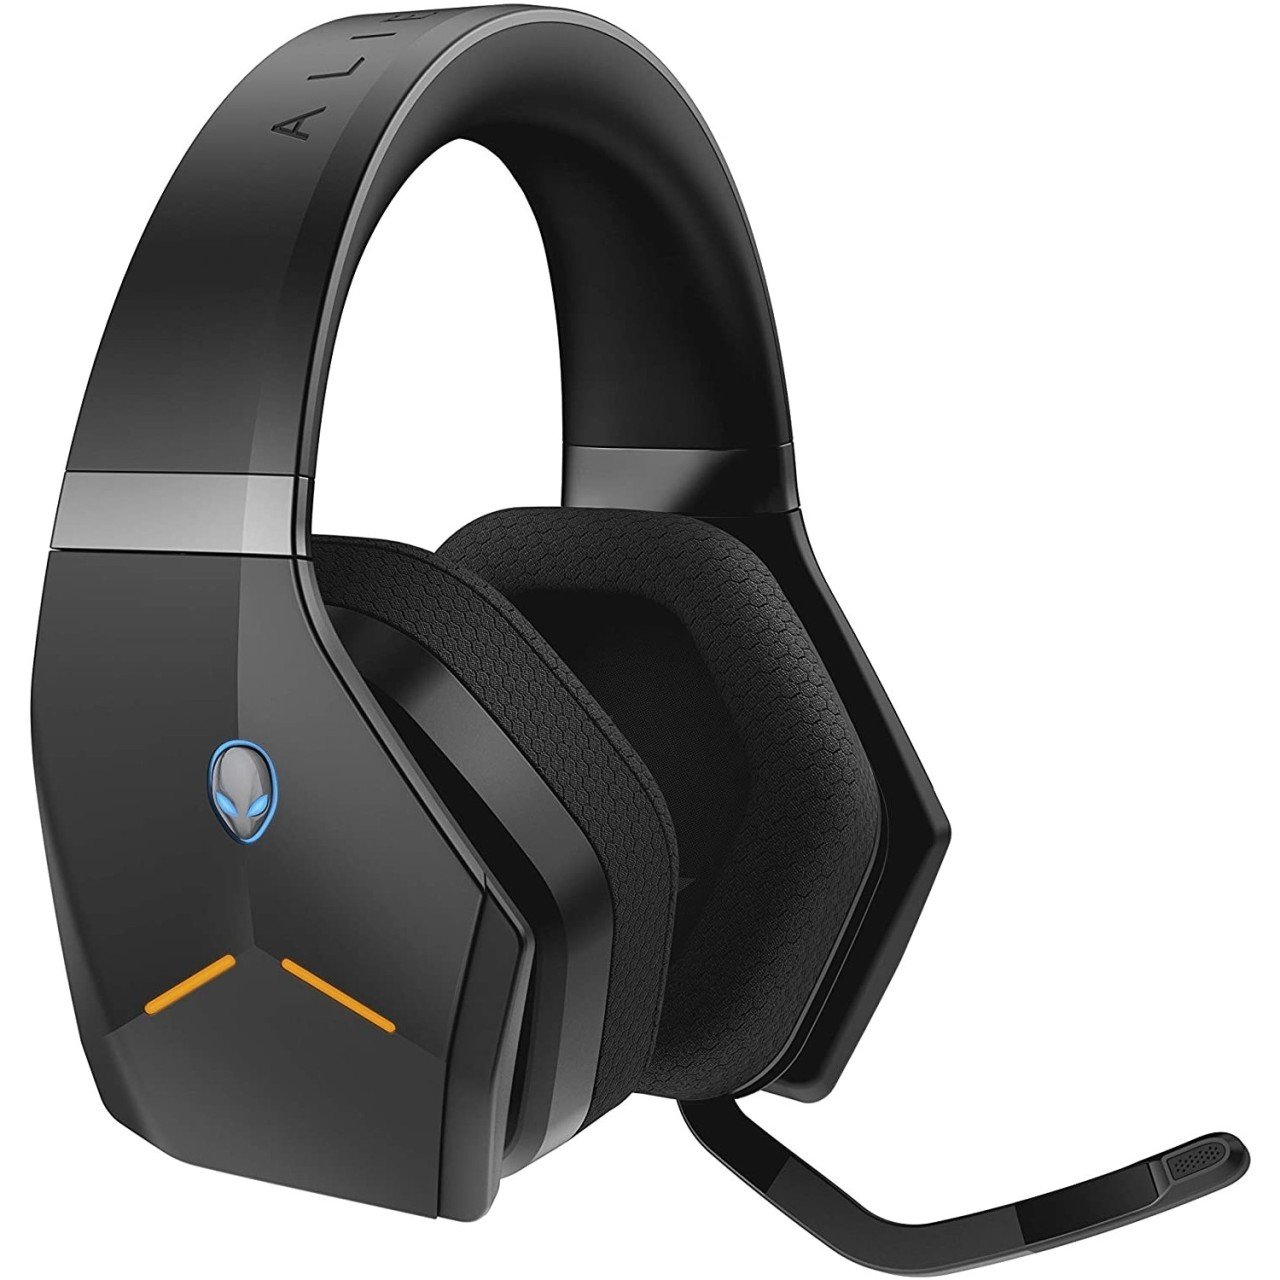 DELL 520-AANP ALIENWARE WIRELESS GAMING HEADSET AW988